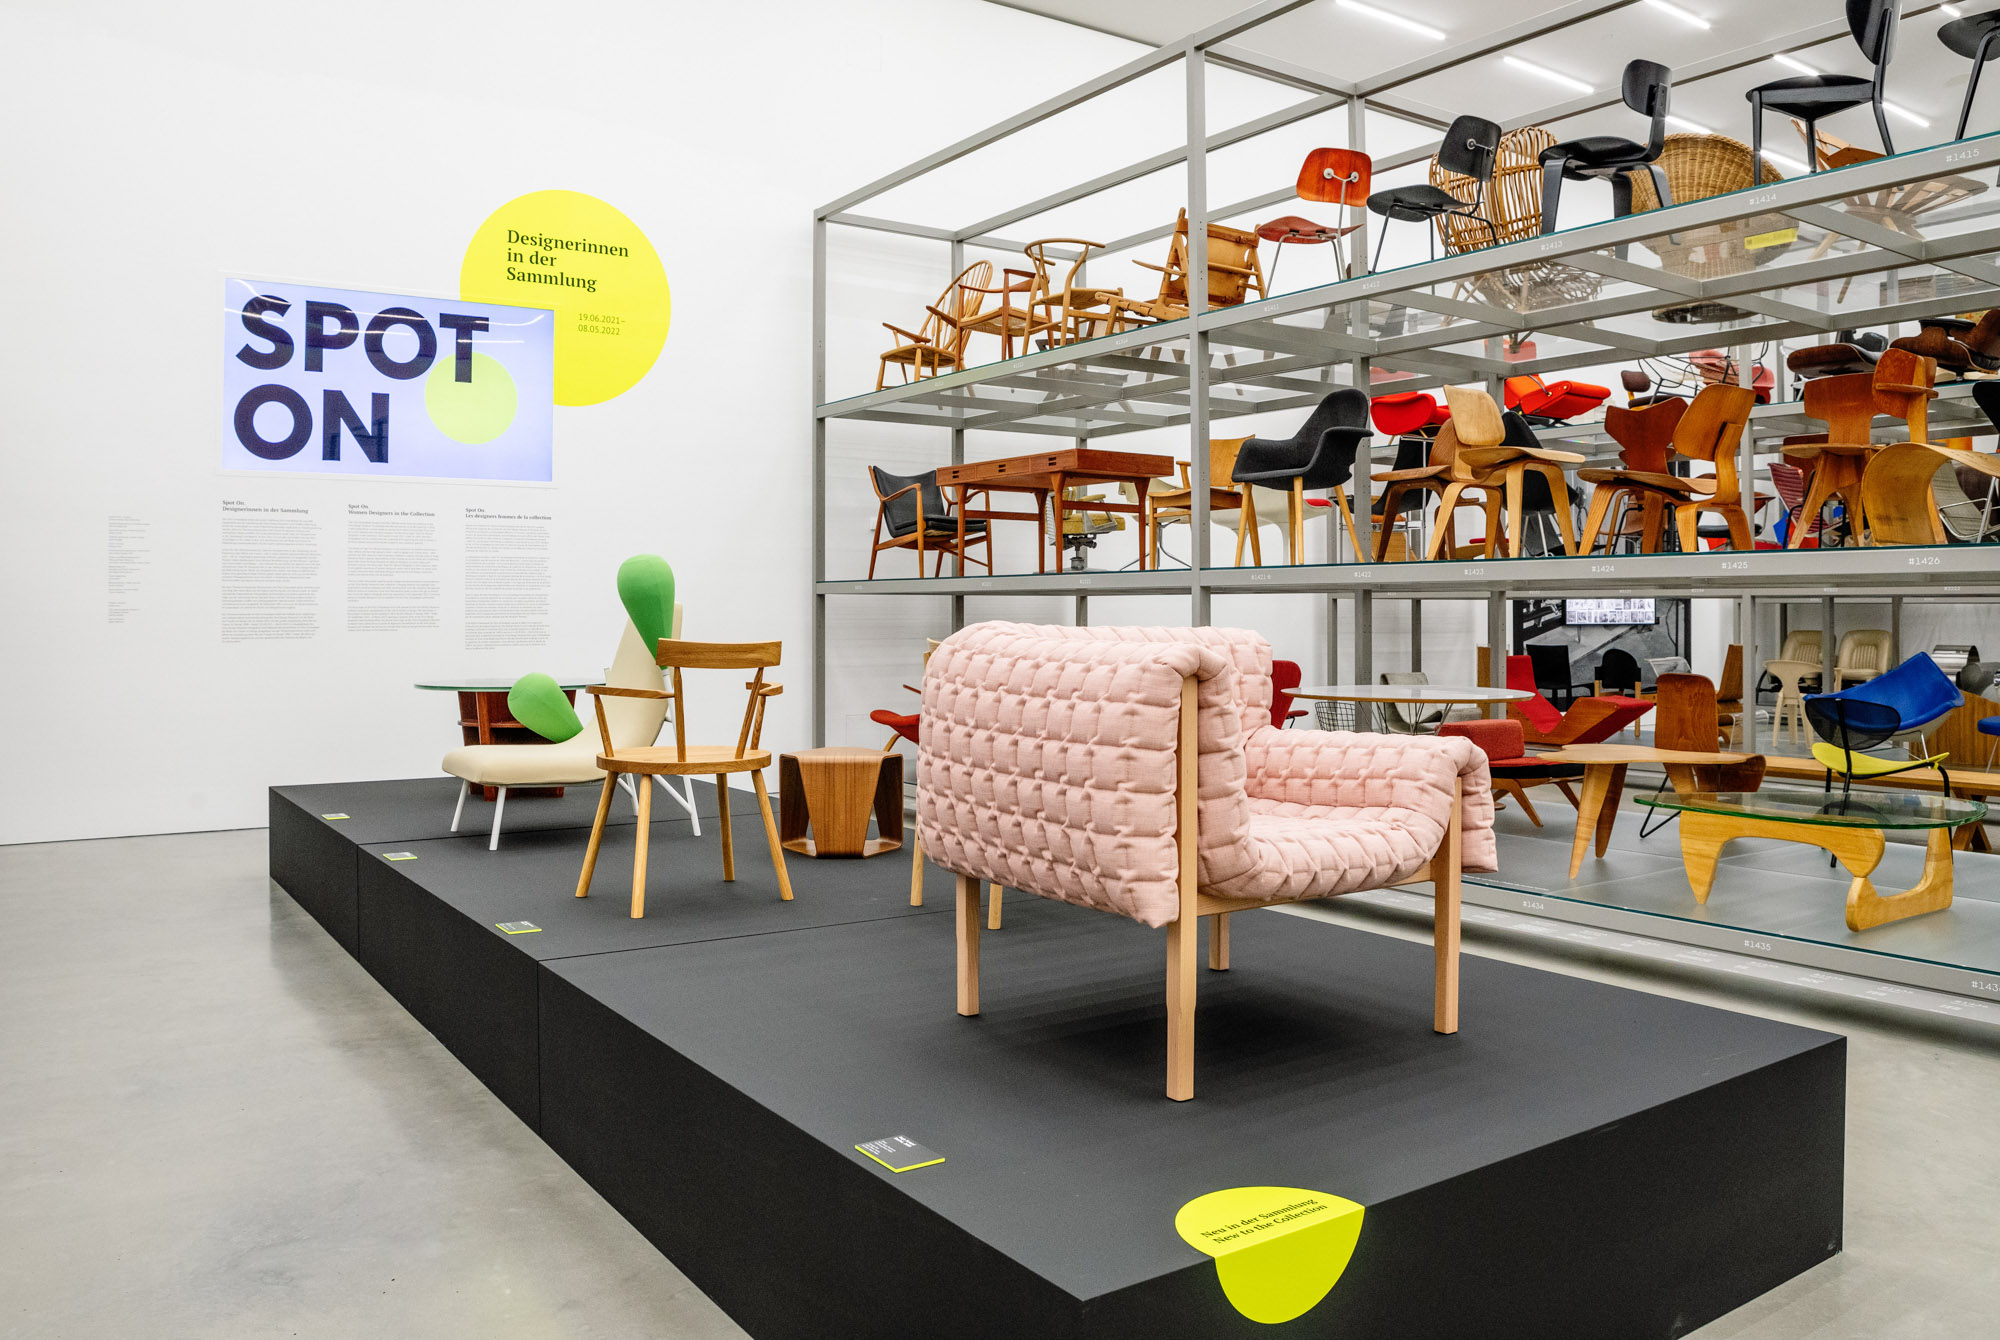 Verstrooien Weg huis snel Vitra Design Museum on Twitter: "#VDMSpotOn Starting today, you can  discover our new exhibition “Spot On: Women Designers in the Collection”!  It explores the role of women in furniture design and demonstrates